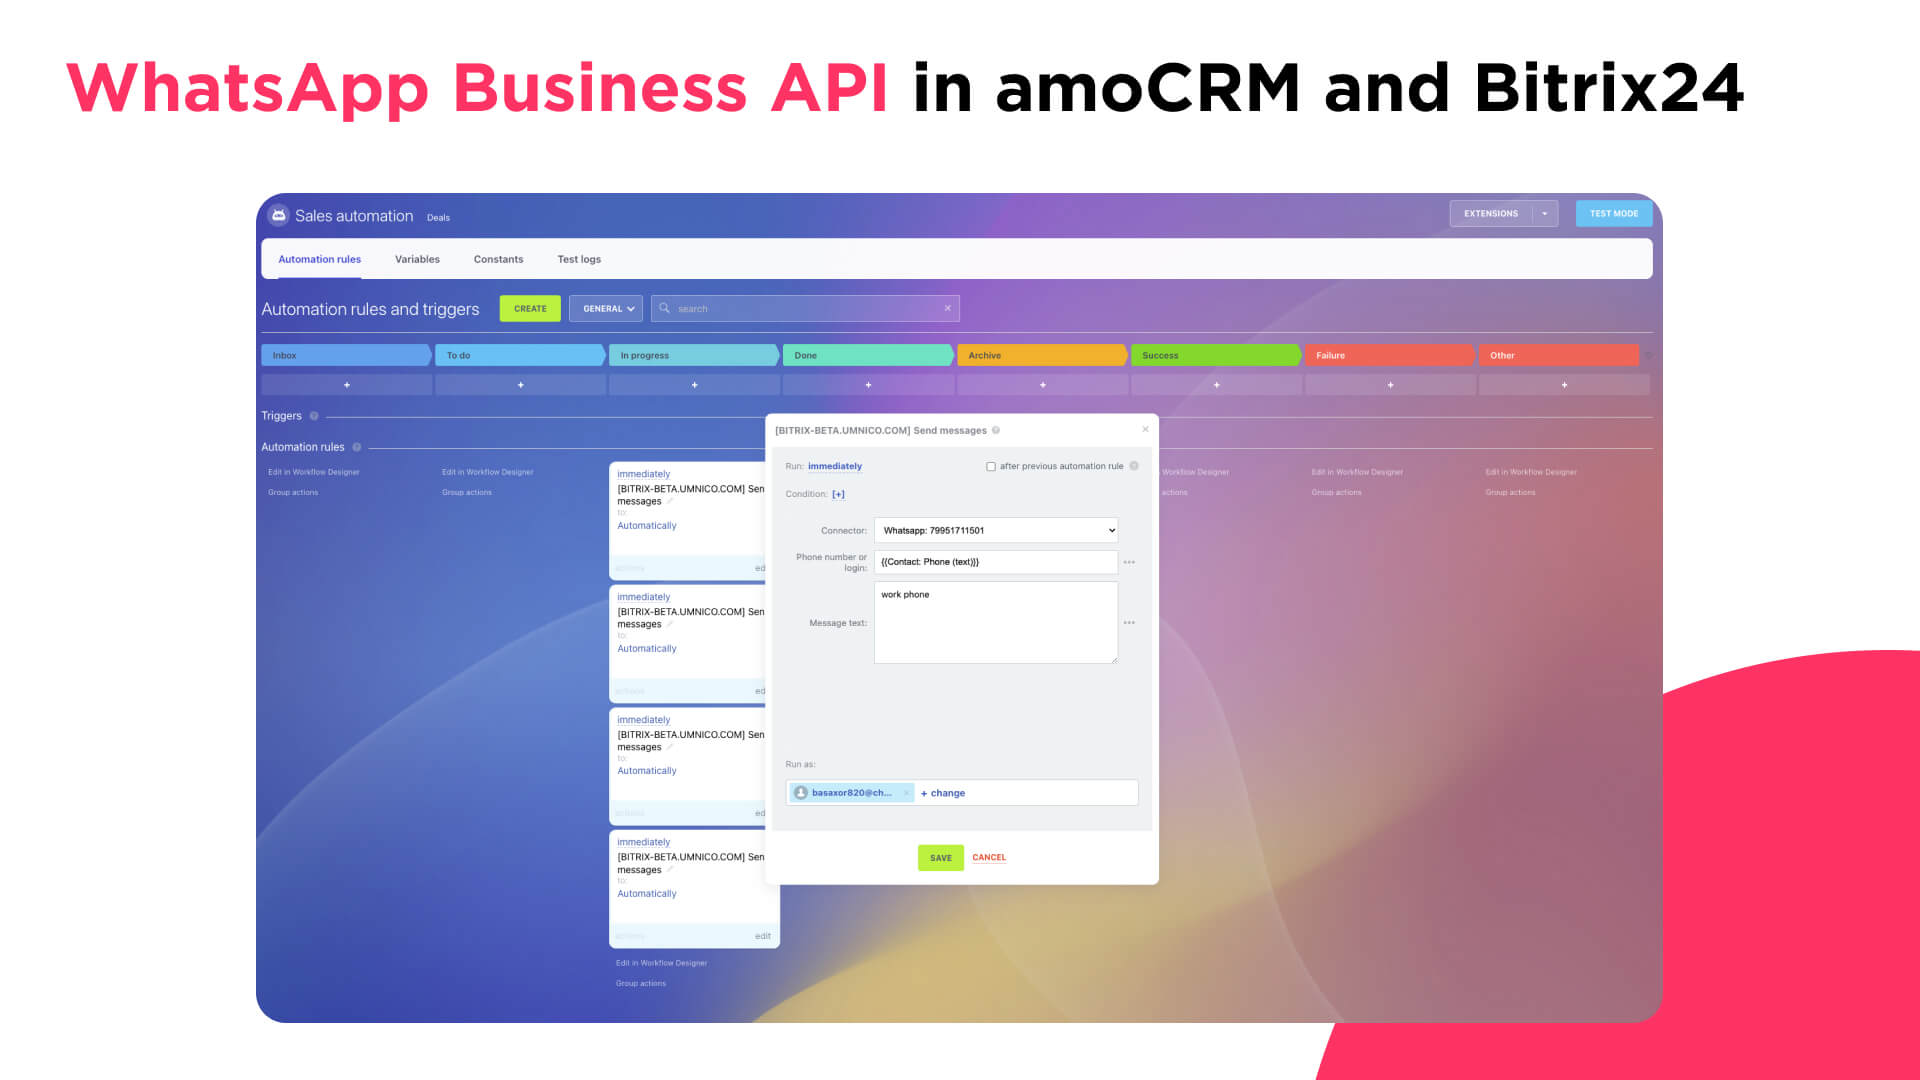 WhatsApp Business API support for amoCRM and Bitrix24